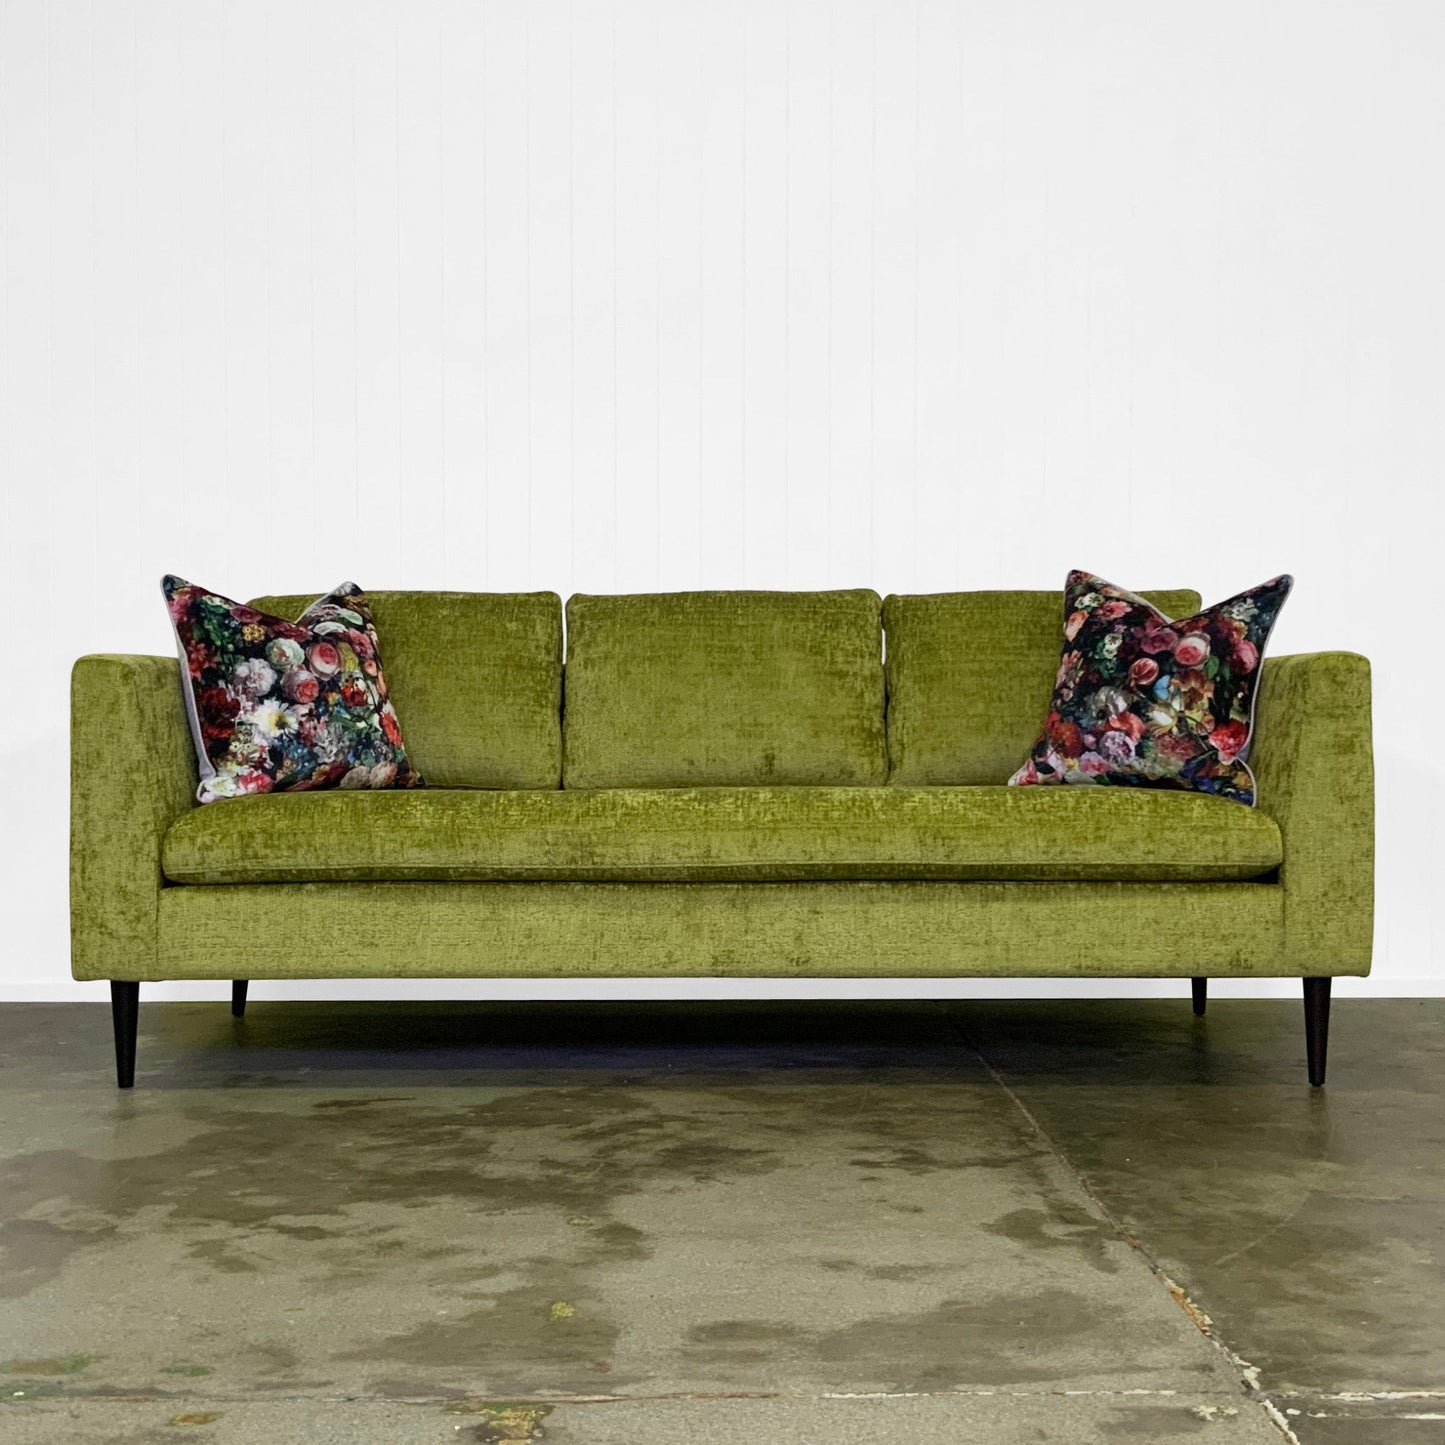 Elliott Sofa | Value Range Fabrics Multiple Sizes And Options Available Made To Order In Wa W.a Made